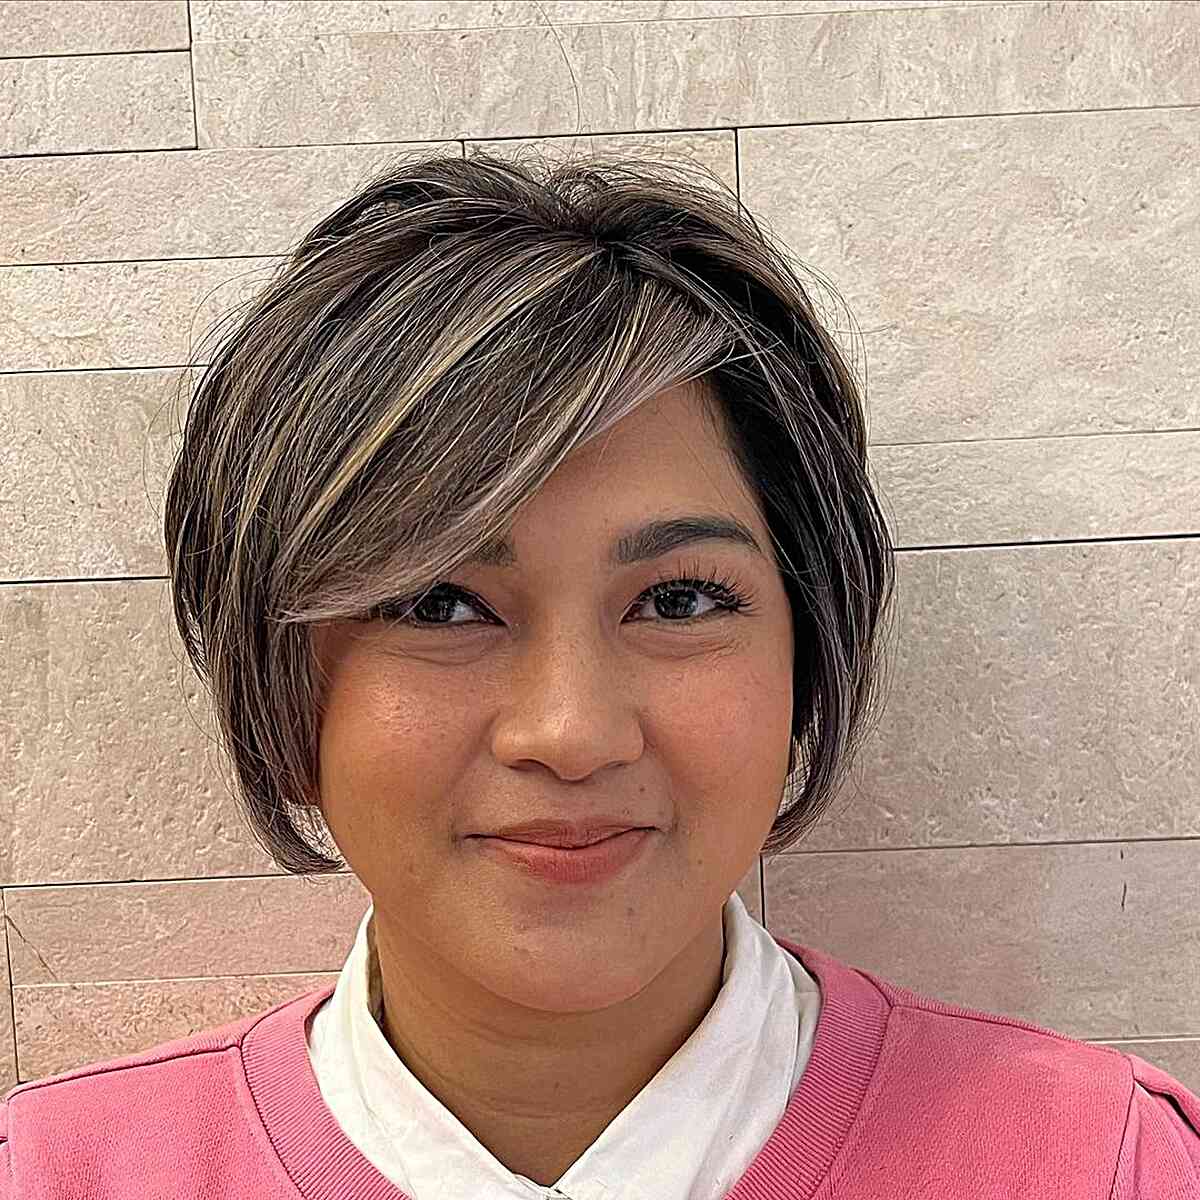 French Balayage on a Long Pixie Cut for Round Faces